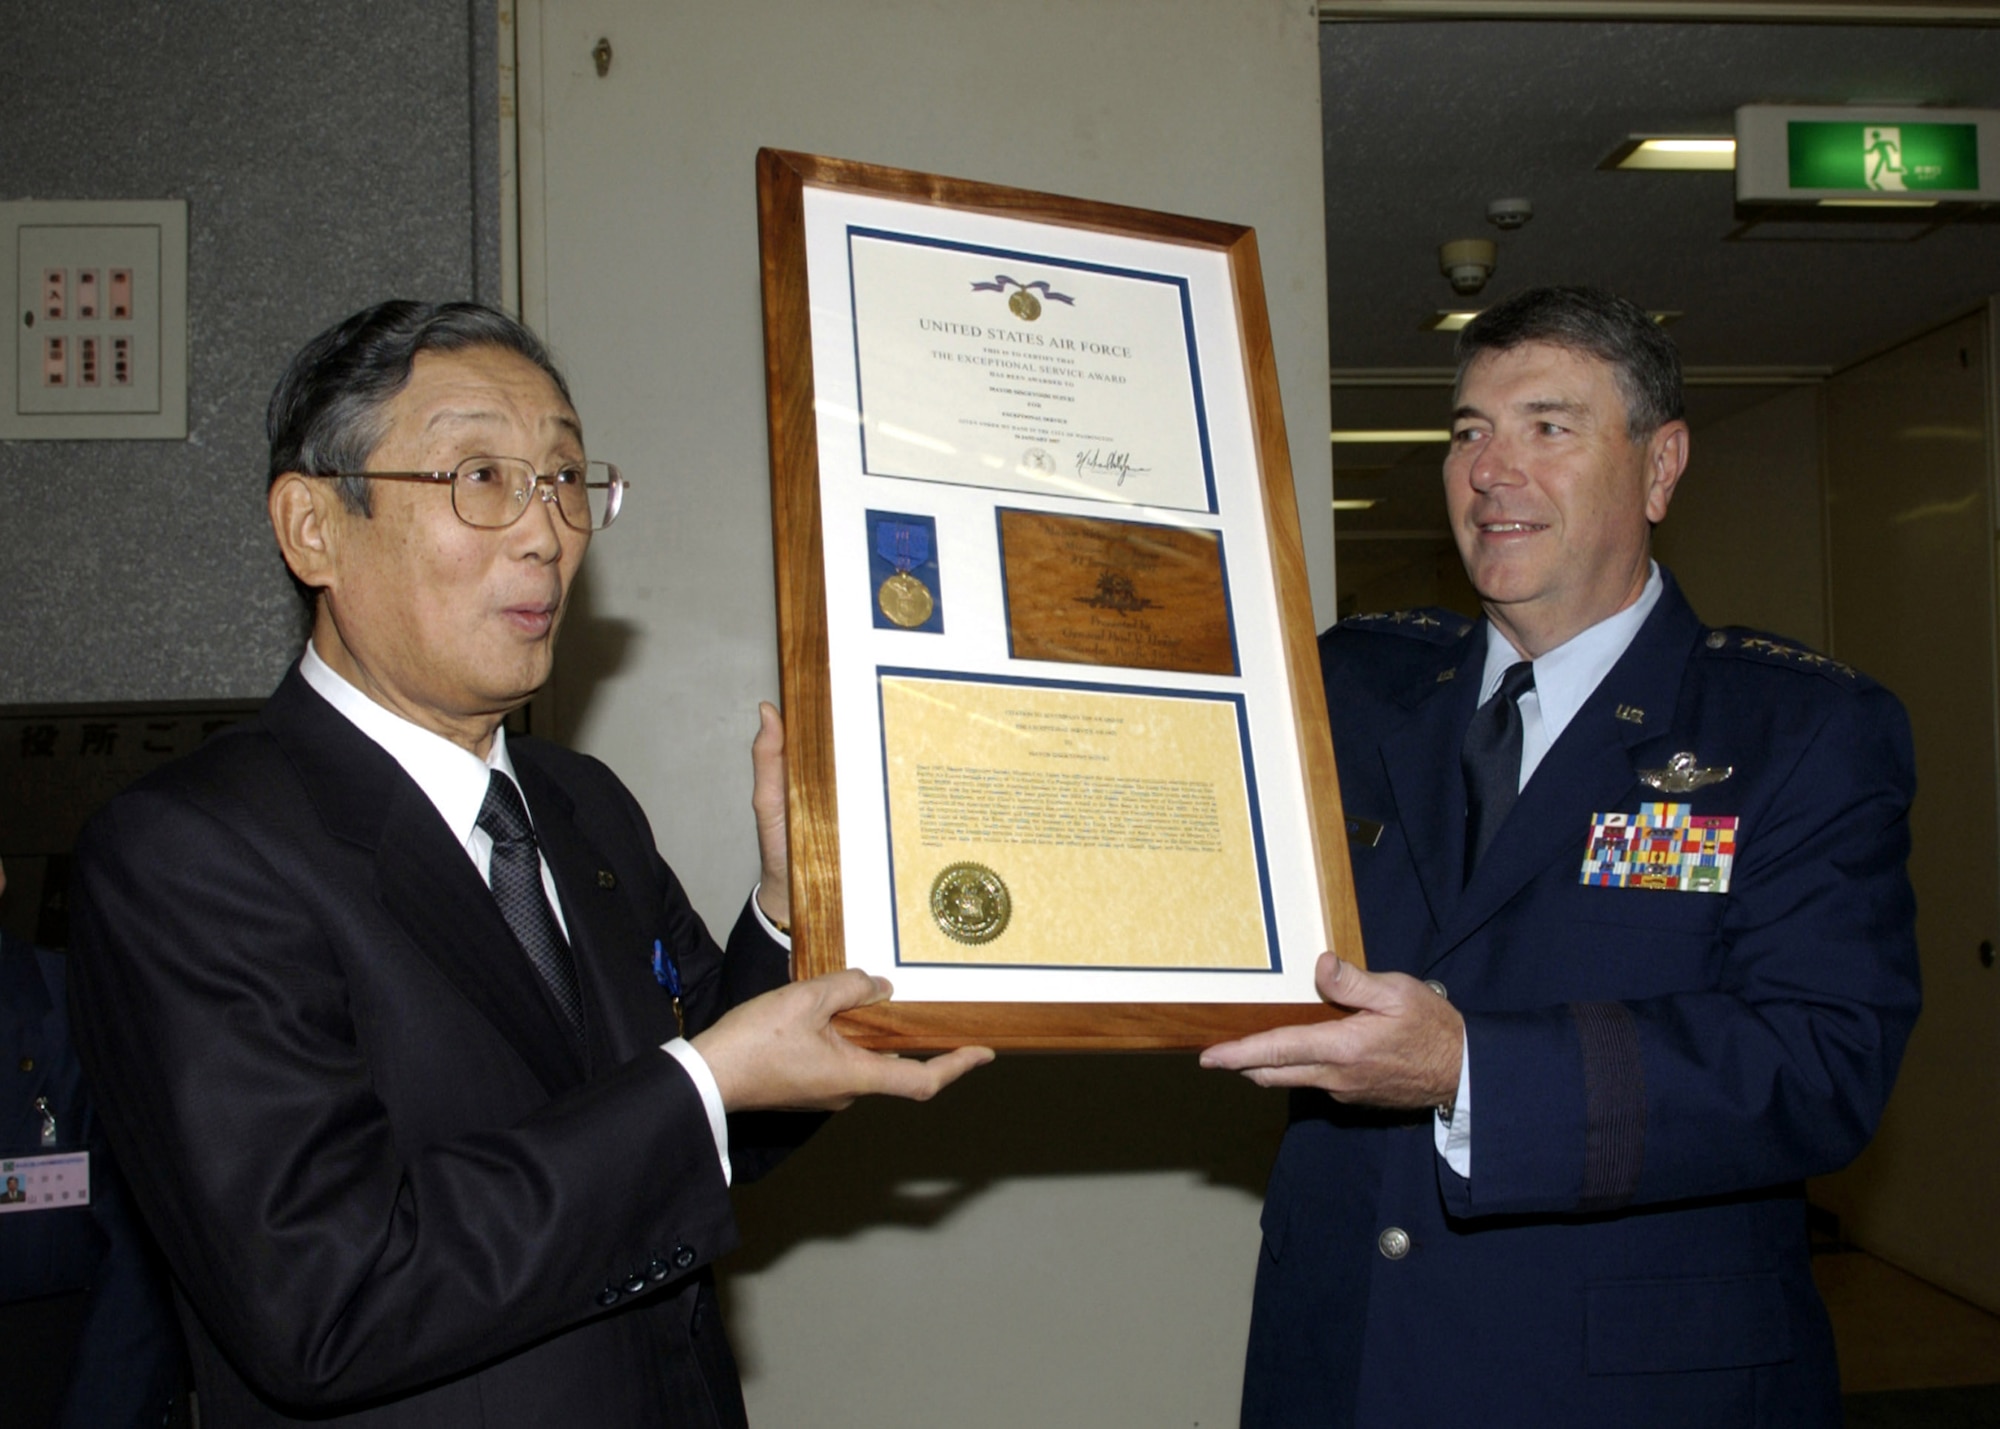 Gen. Paul V. Hester presents the Air Force Exemplary Civilian Service award to Misawa City Mayor Shigeyoshi Suzuki Jan. 31 in Misawa City, Japan. It was the first time a Japanese official was presented with an Air Force-level award. General Hester is the Pacific Air Forces commander. Mayor Suzuki, a longtime friend and supporter of American servicemembers, their families and the Air Force mission in Northern Japan, passed away May 1 from pneumonia at the age of 66. Mayor Suzuki served as mayor of Misawa City, representing a city of 40,000, for more than two decades and was in his sixth term upon his death. Throughout his years as mayor, he laid the foundation for strong relations between the base and the local area. (U.S. Air Force photo/Senior Airman Robert Barnett) 